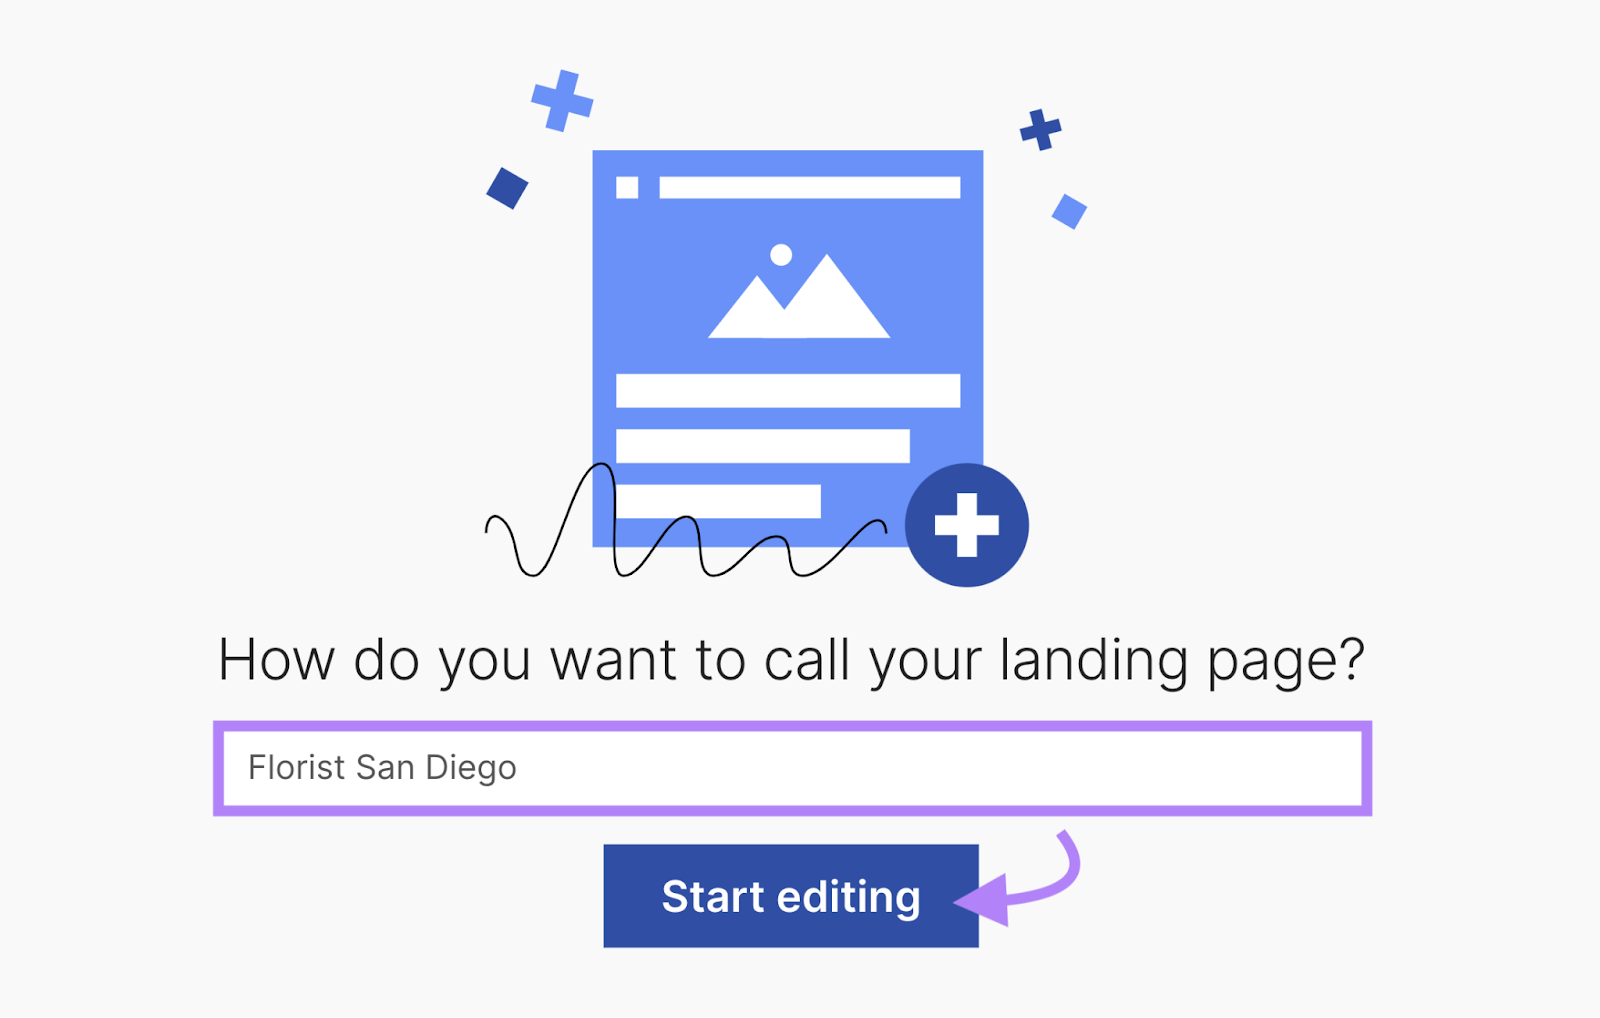 landing page named "Florist San Diego" and "Start editing" button highlighted